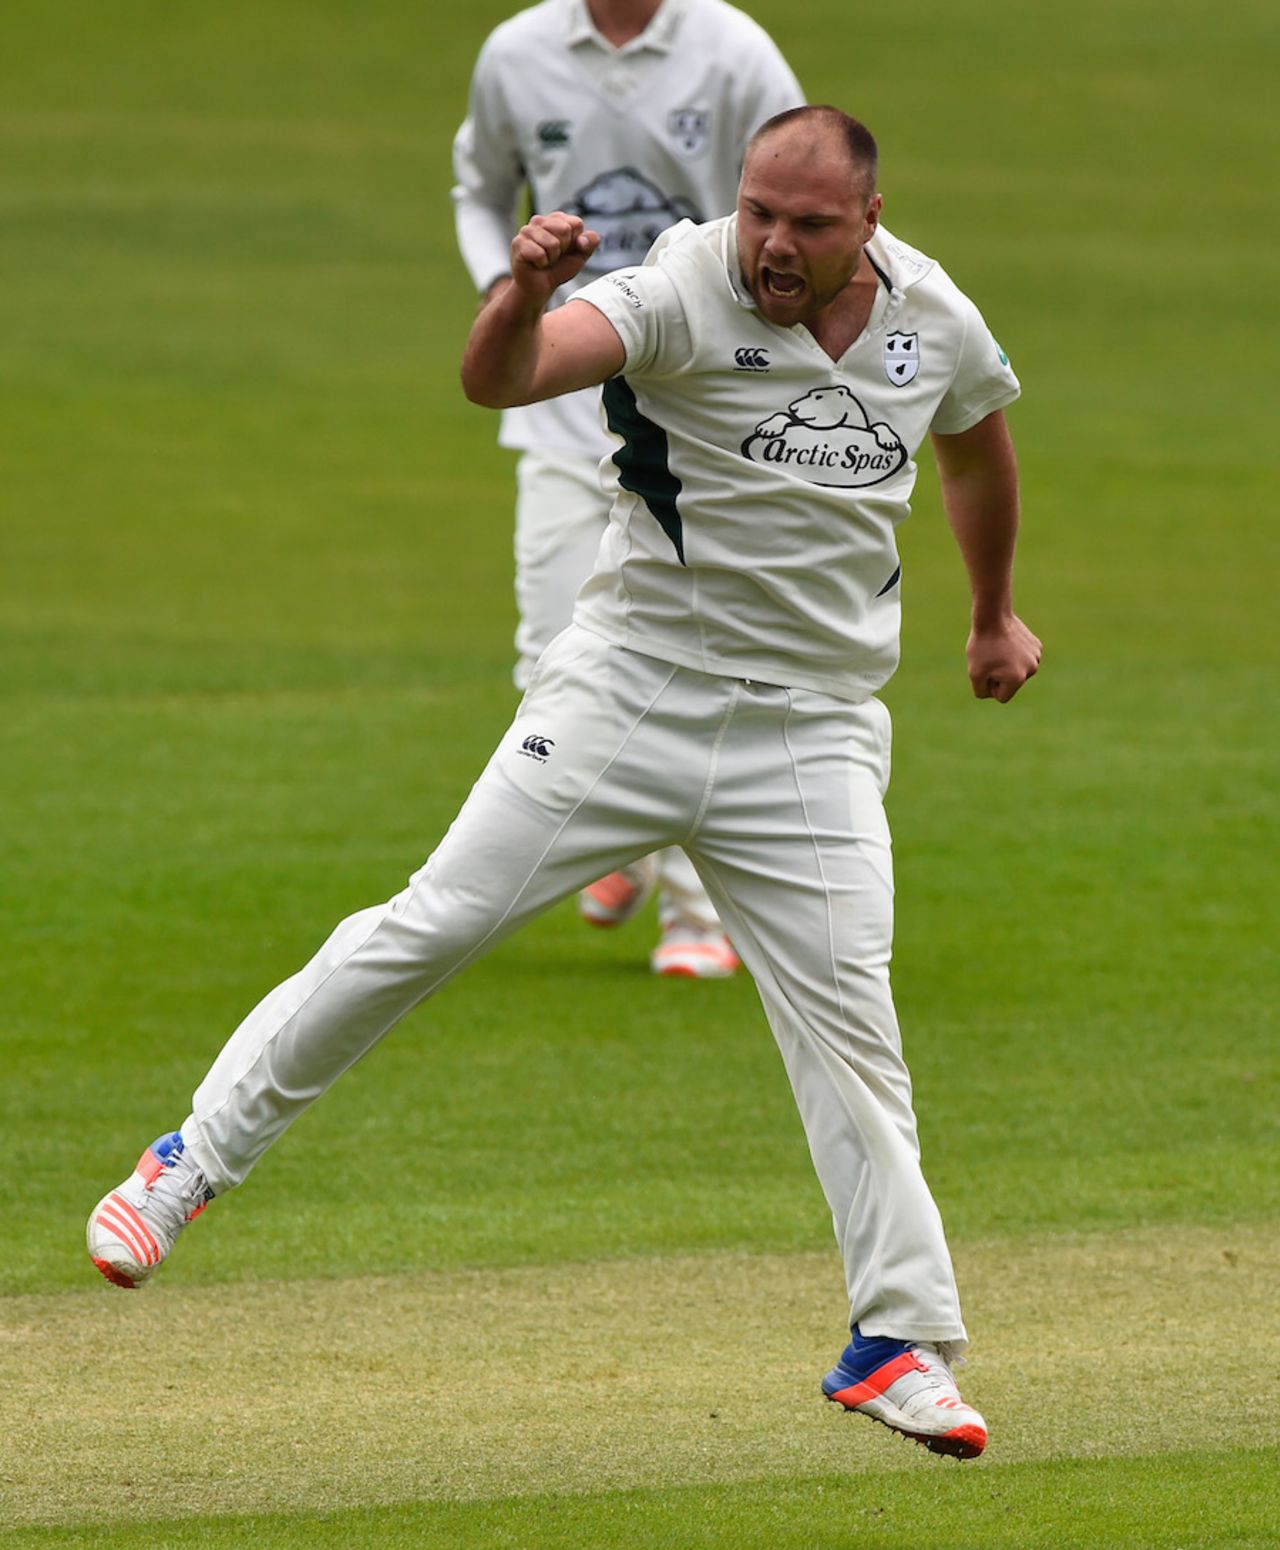 Joe Leach was on a hat-trick early in Glamorgan's innings, Glamorgan v Worcestershire, County Championship, Division Two, Cardiff, 2nd day, May 9, 2016